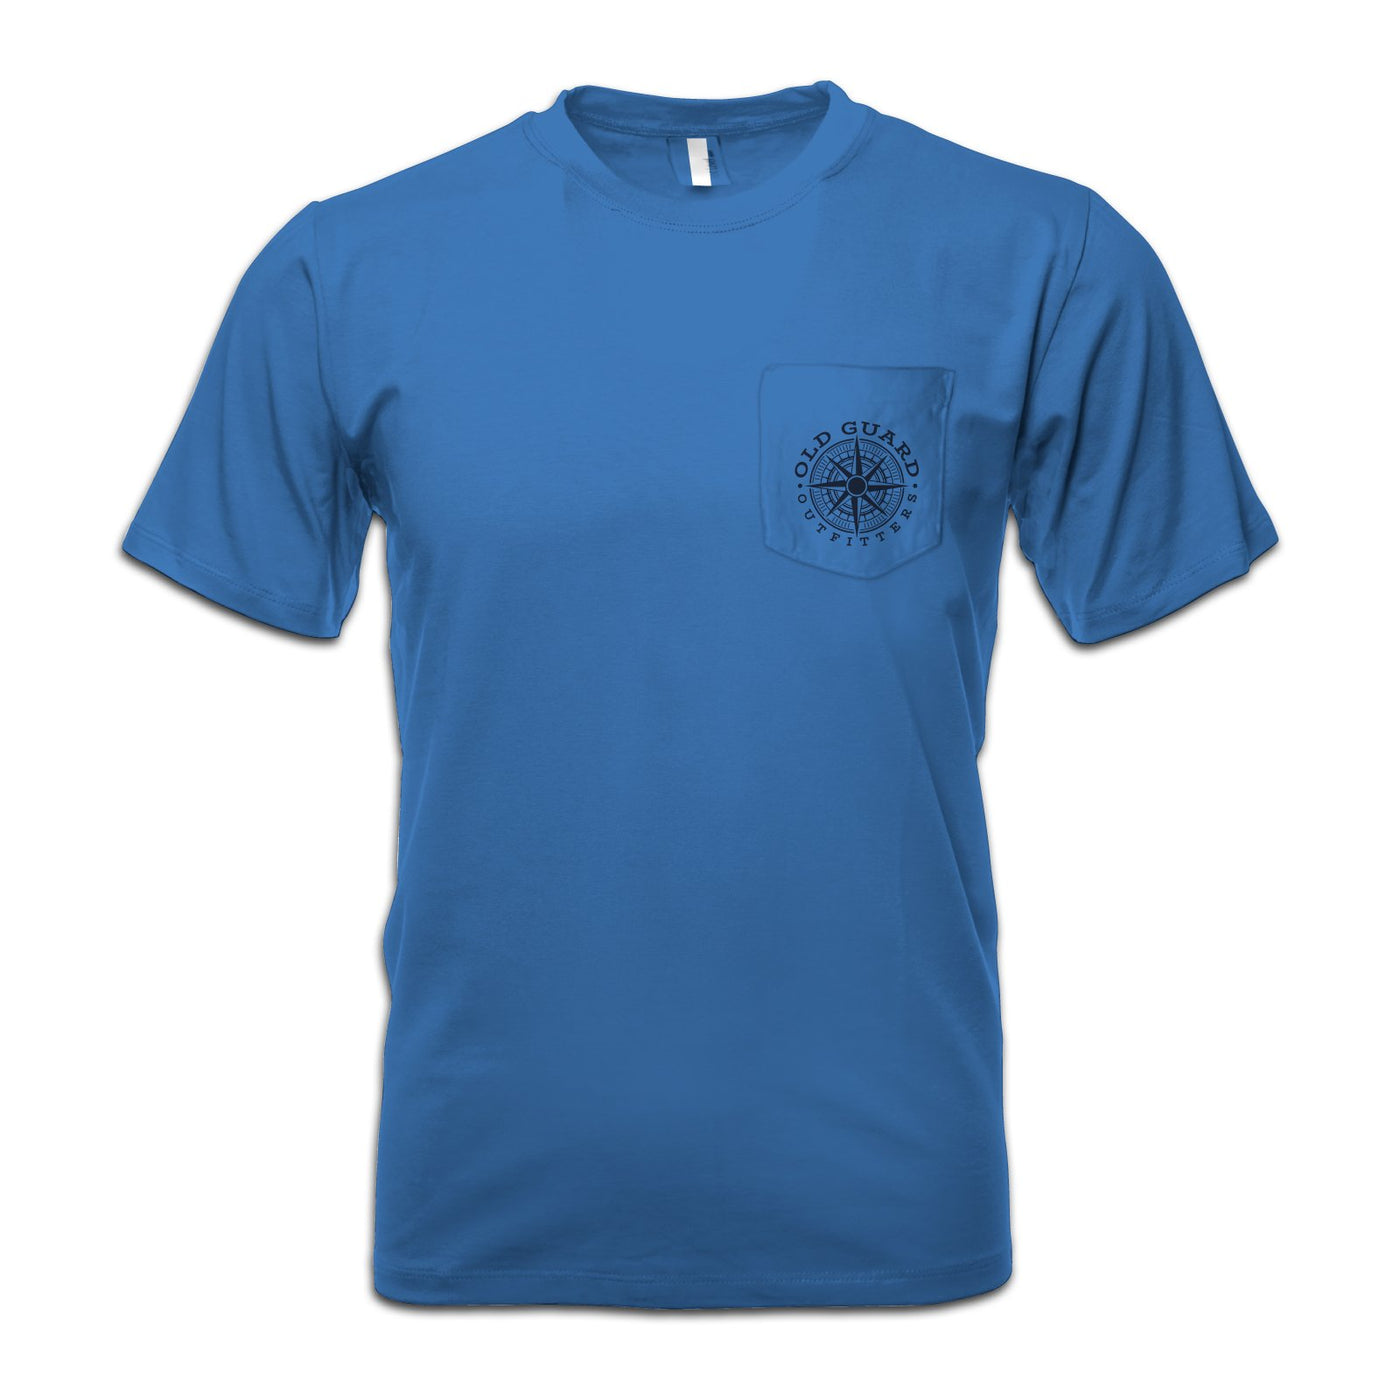 American Hiker Short Sleeve T-Shirt by Old Guard Outfitters